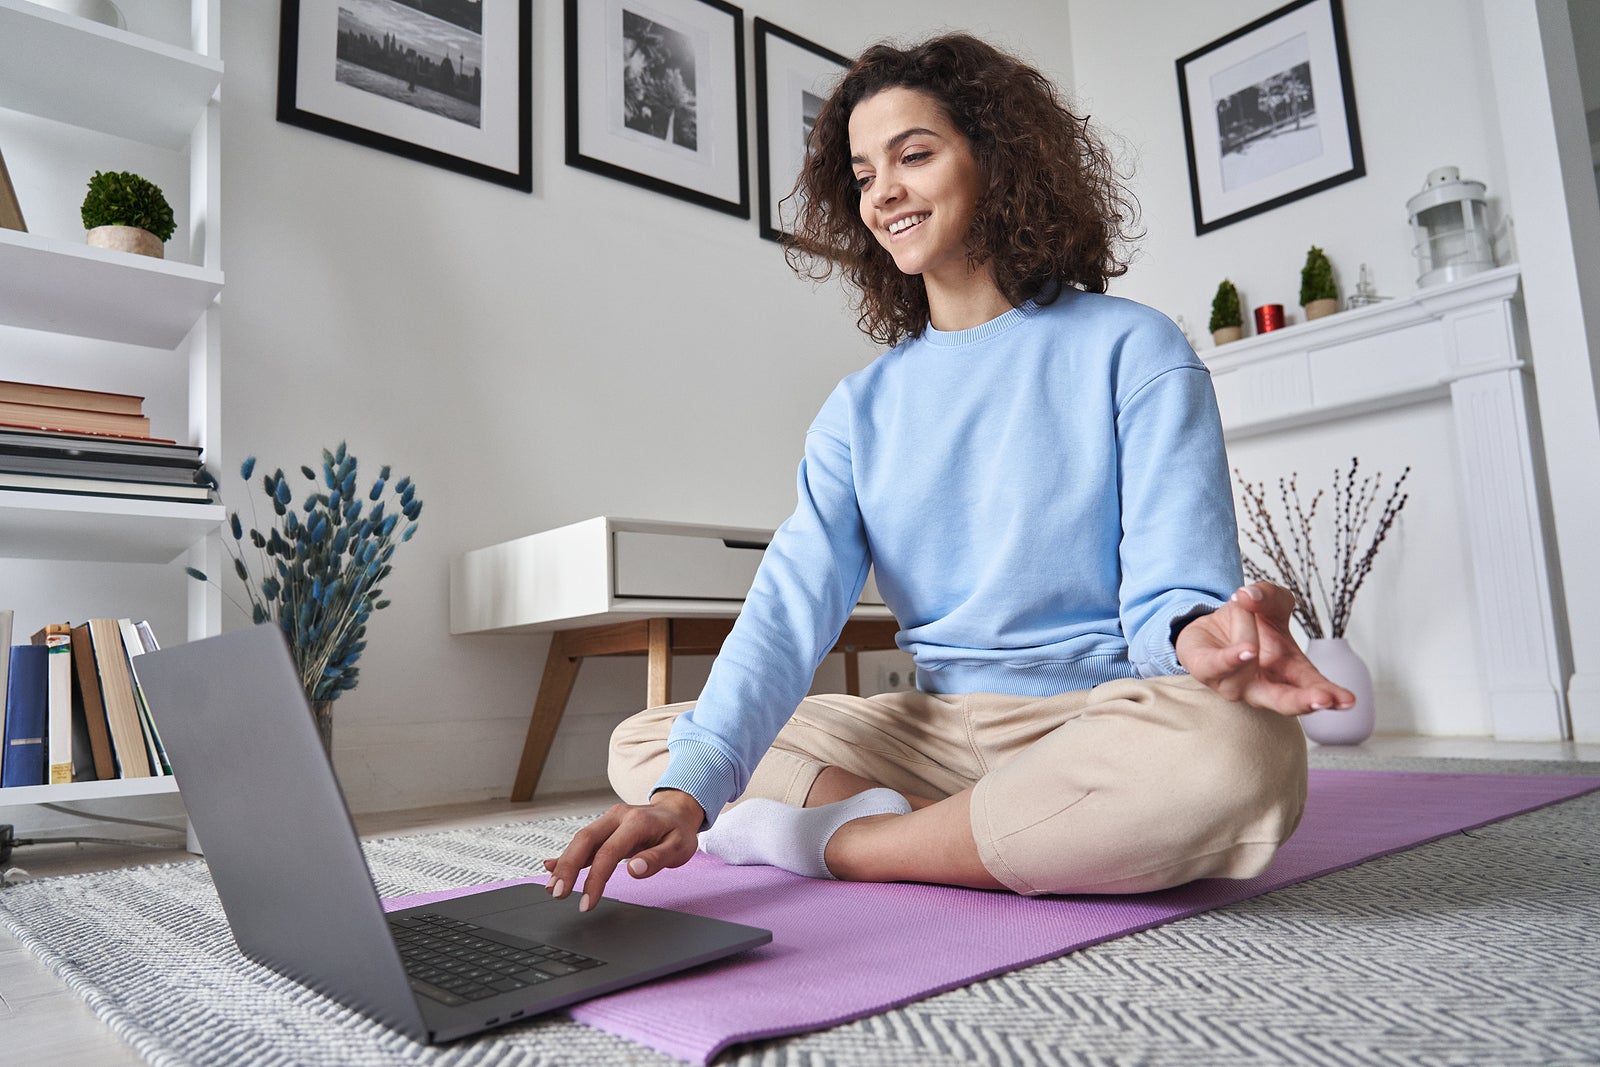 5 Things to Know About Virtual Employee Wellness Programs